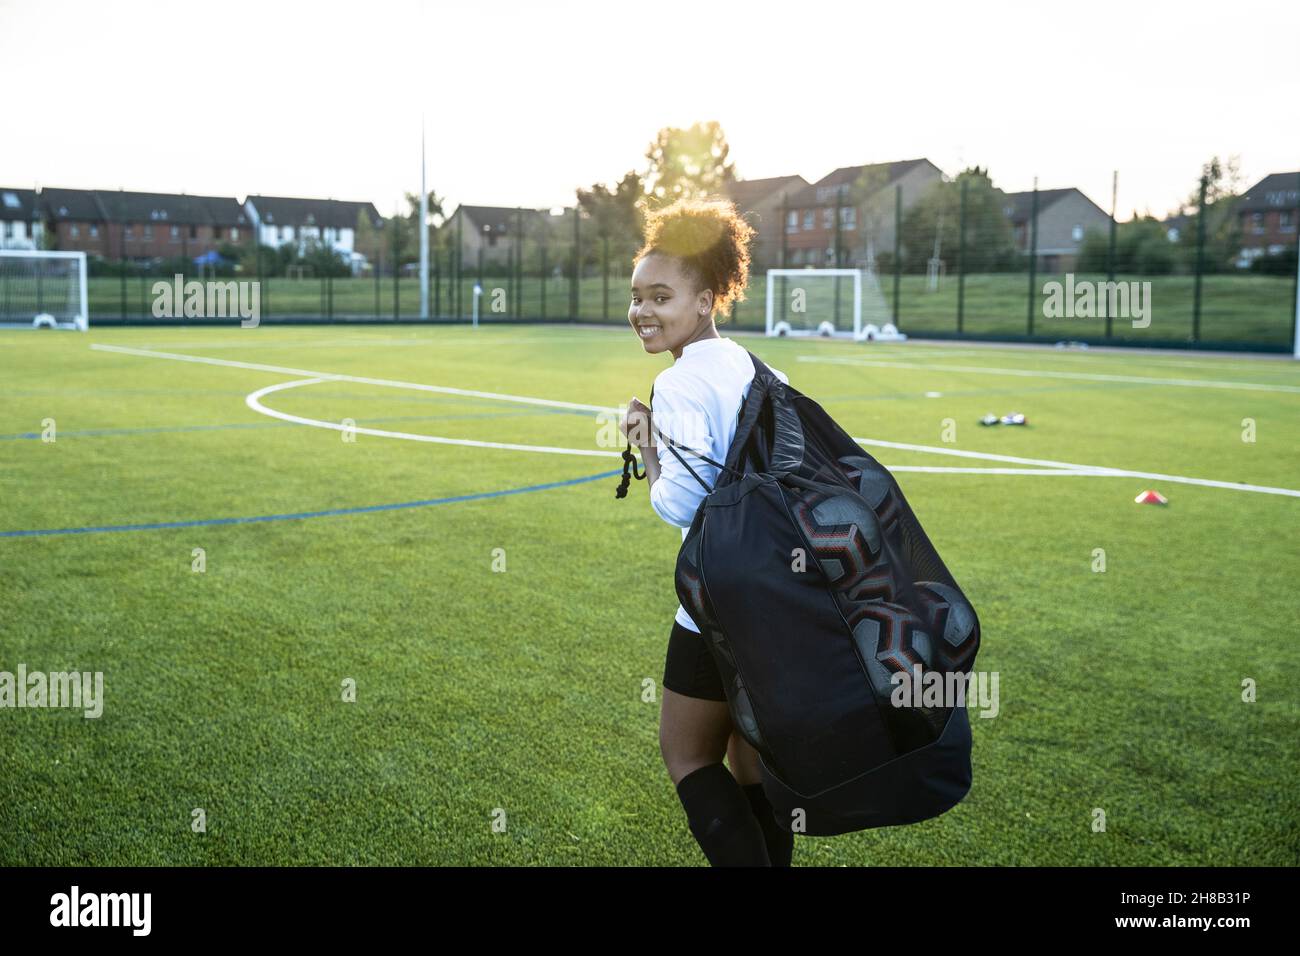 UK, Smiling female soccer player carrying bag with balls in field Stock Photo